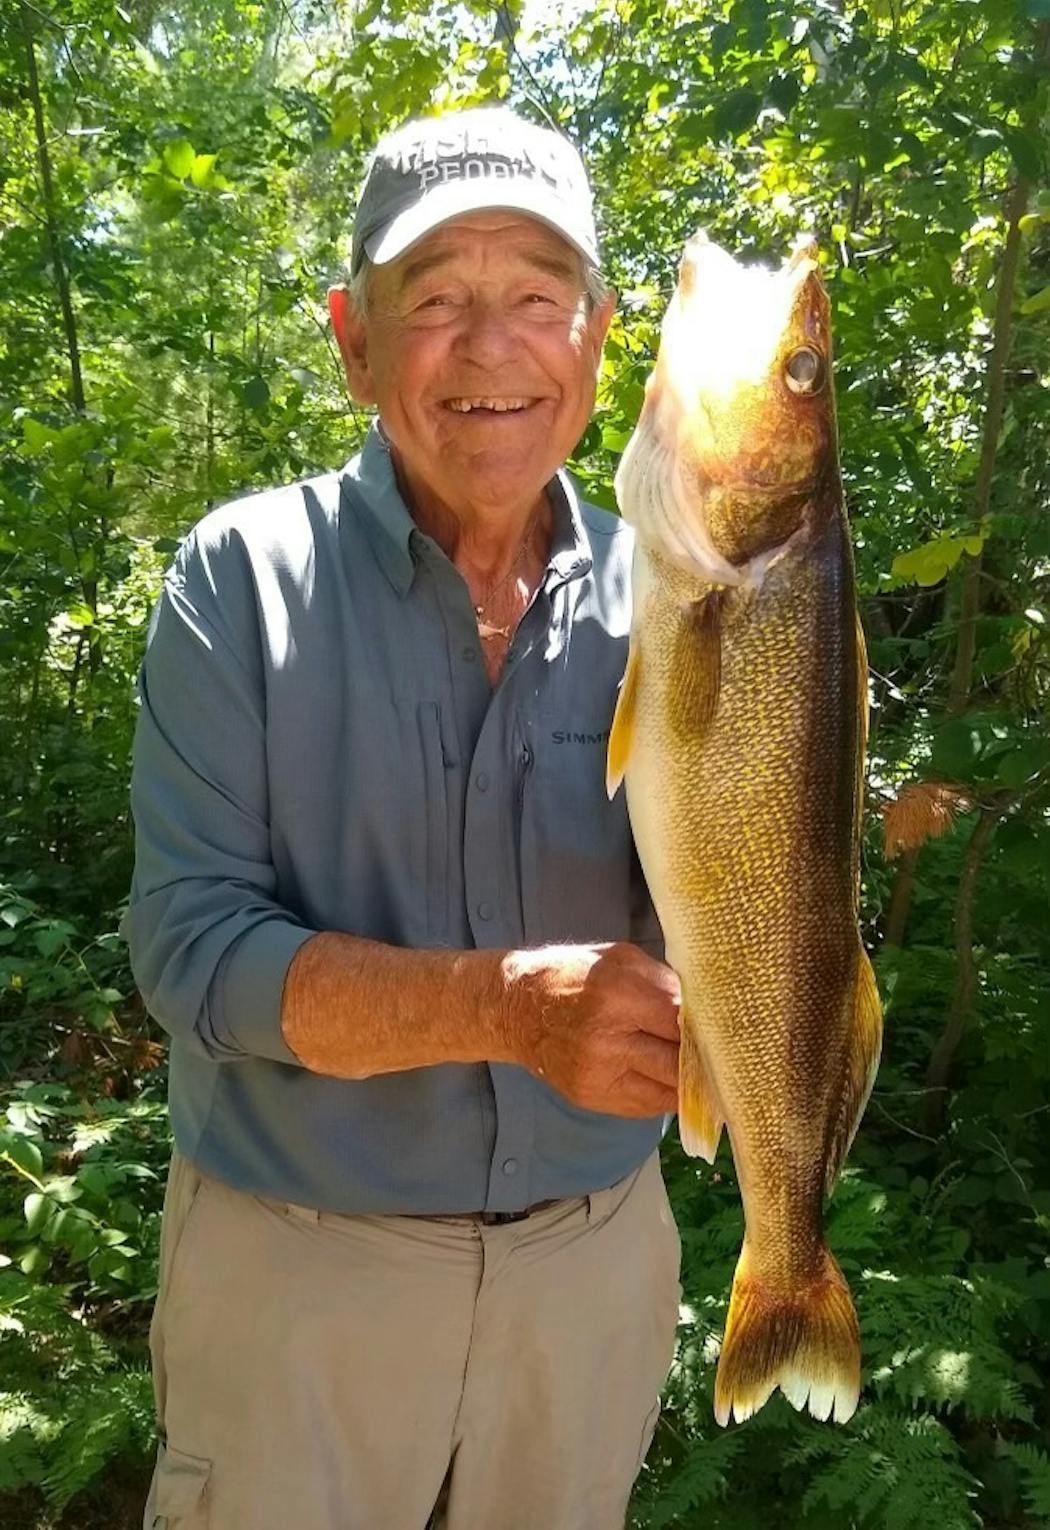 Marv Koep, semi-retired Brainerd area fishing guide and onetime owner with his wife, Judy, of Koep’s Nisswa Bait and Tackle, birthplace of the famed Nisswa Guides League.